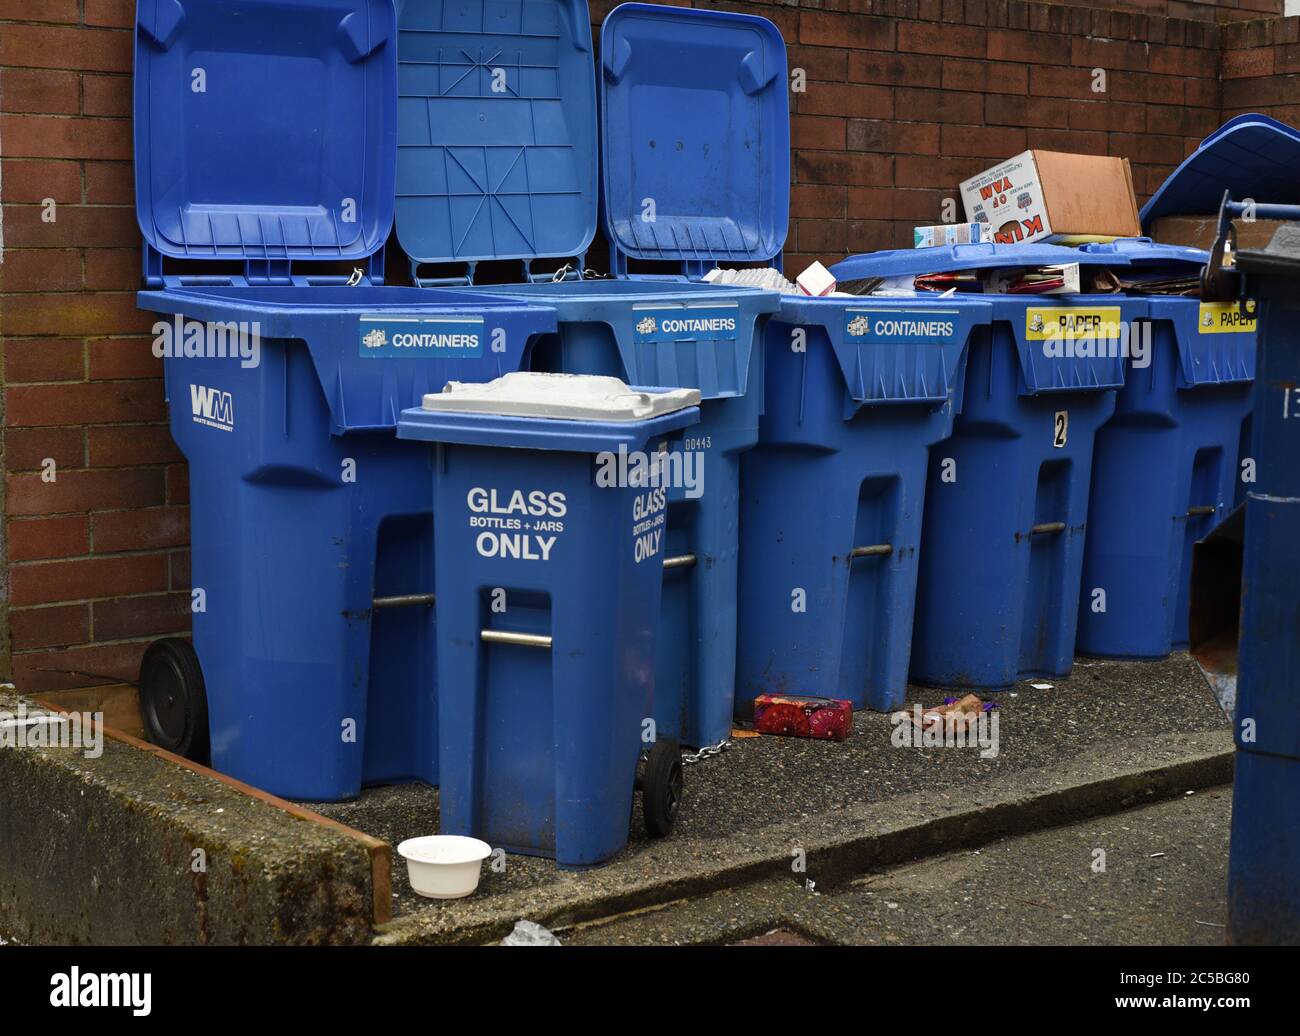 Containers for garbage and for recycling items such as glass and paper in a back alley in Vancouver, British Columbia, Canada Stock Photo